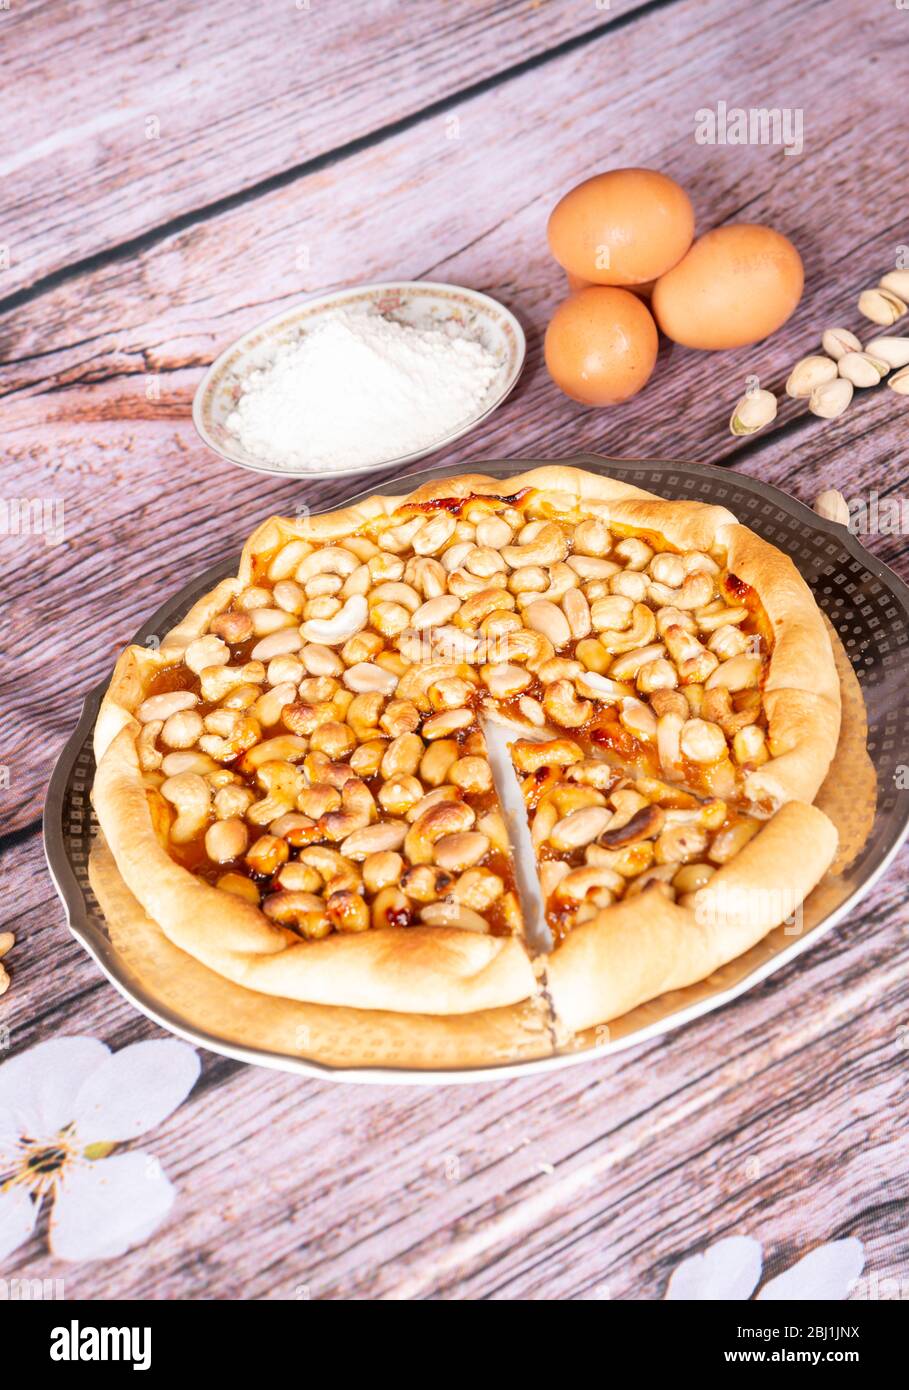 a mom fruit dried tart in the wood table and ingredient Stock Photo